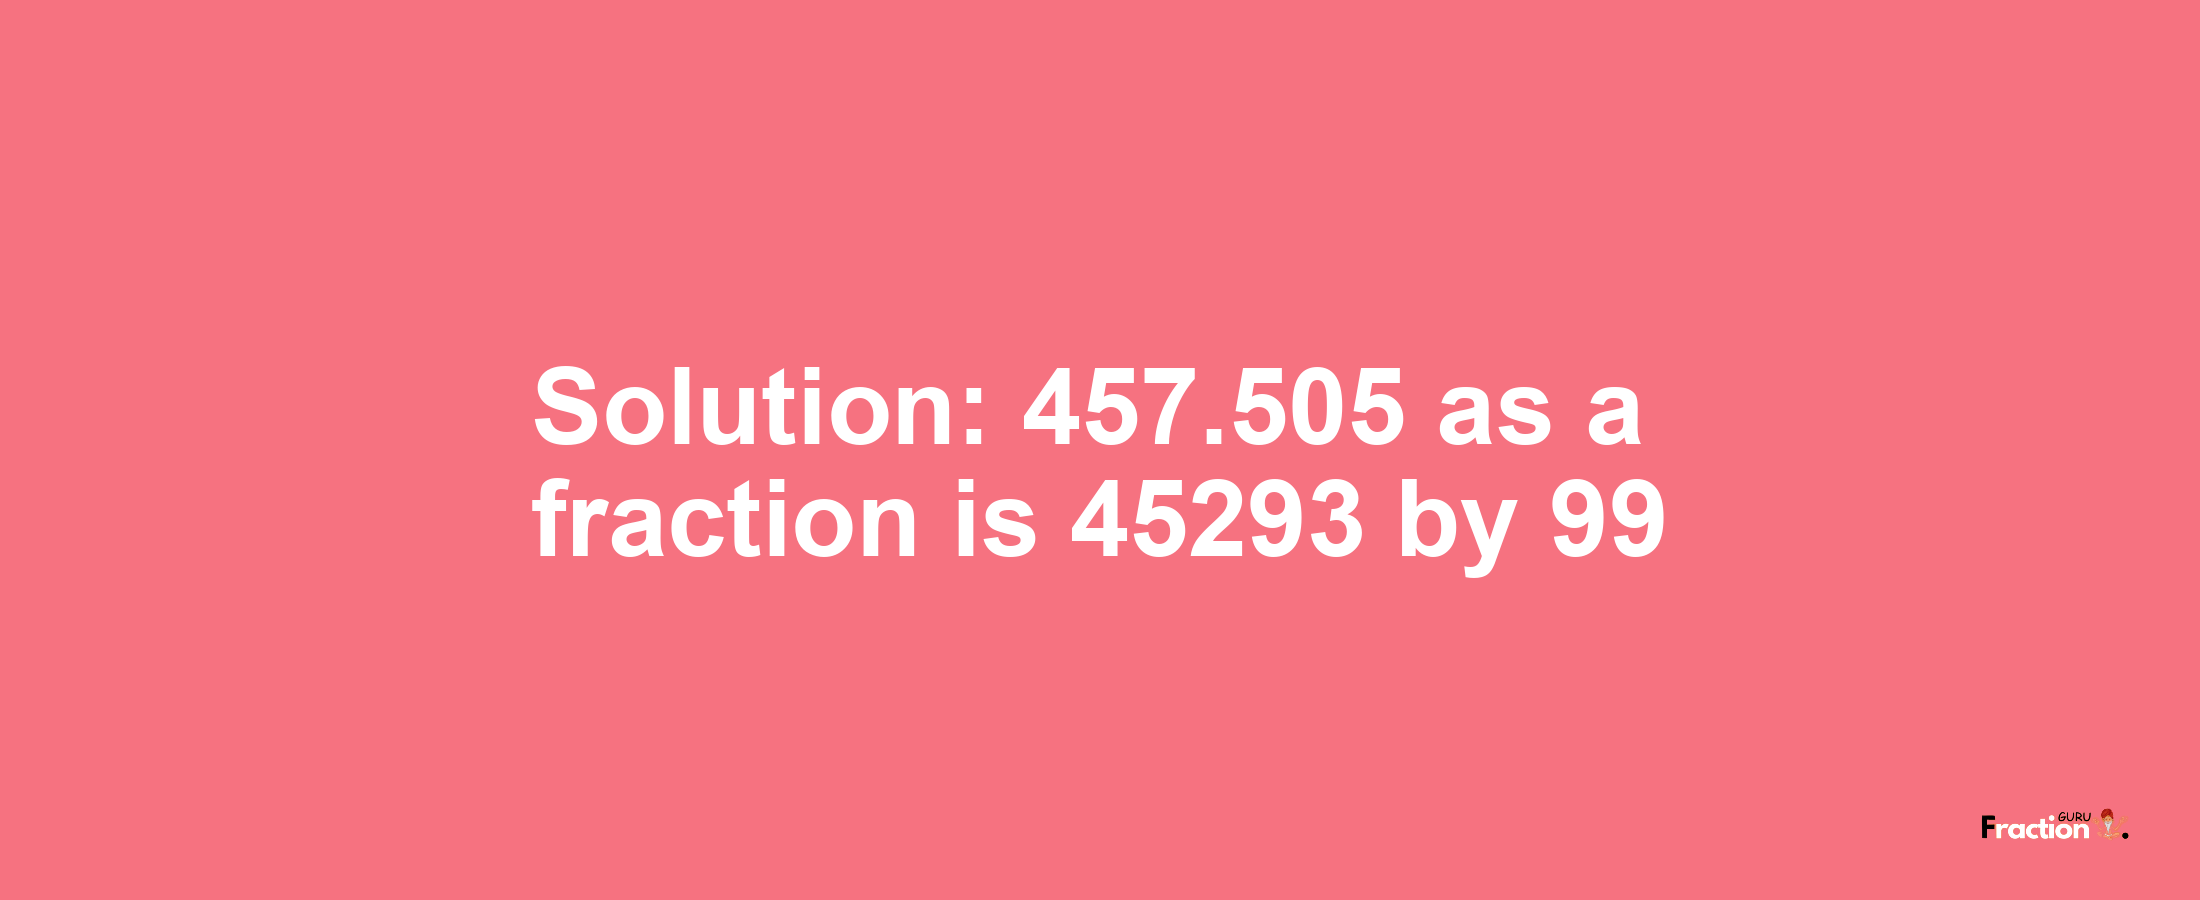 Solution:457.505 as a fraction is 45293/99